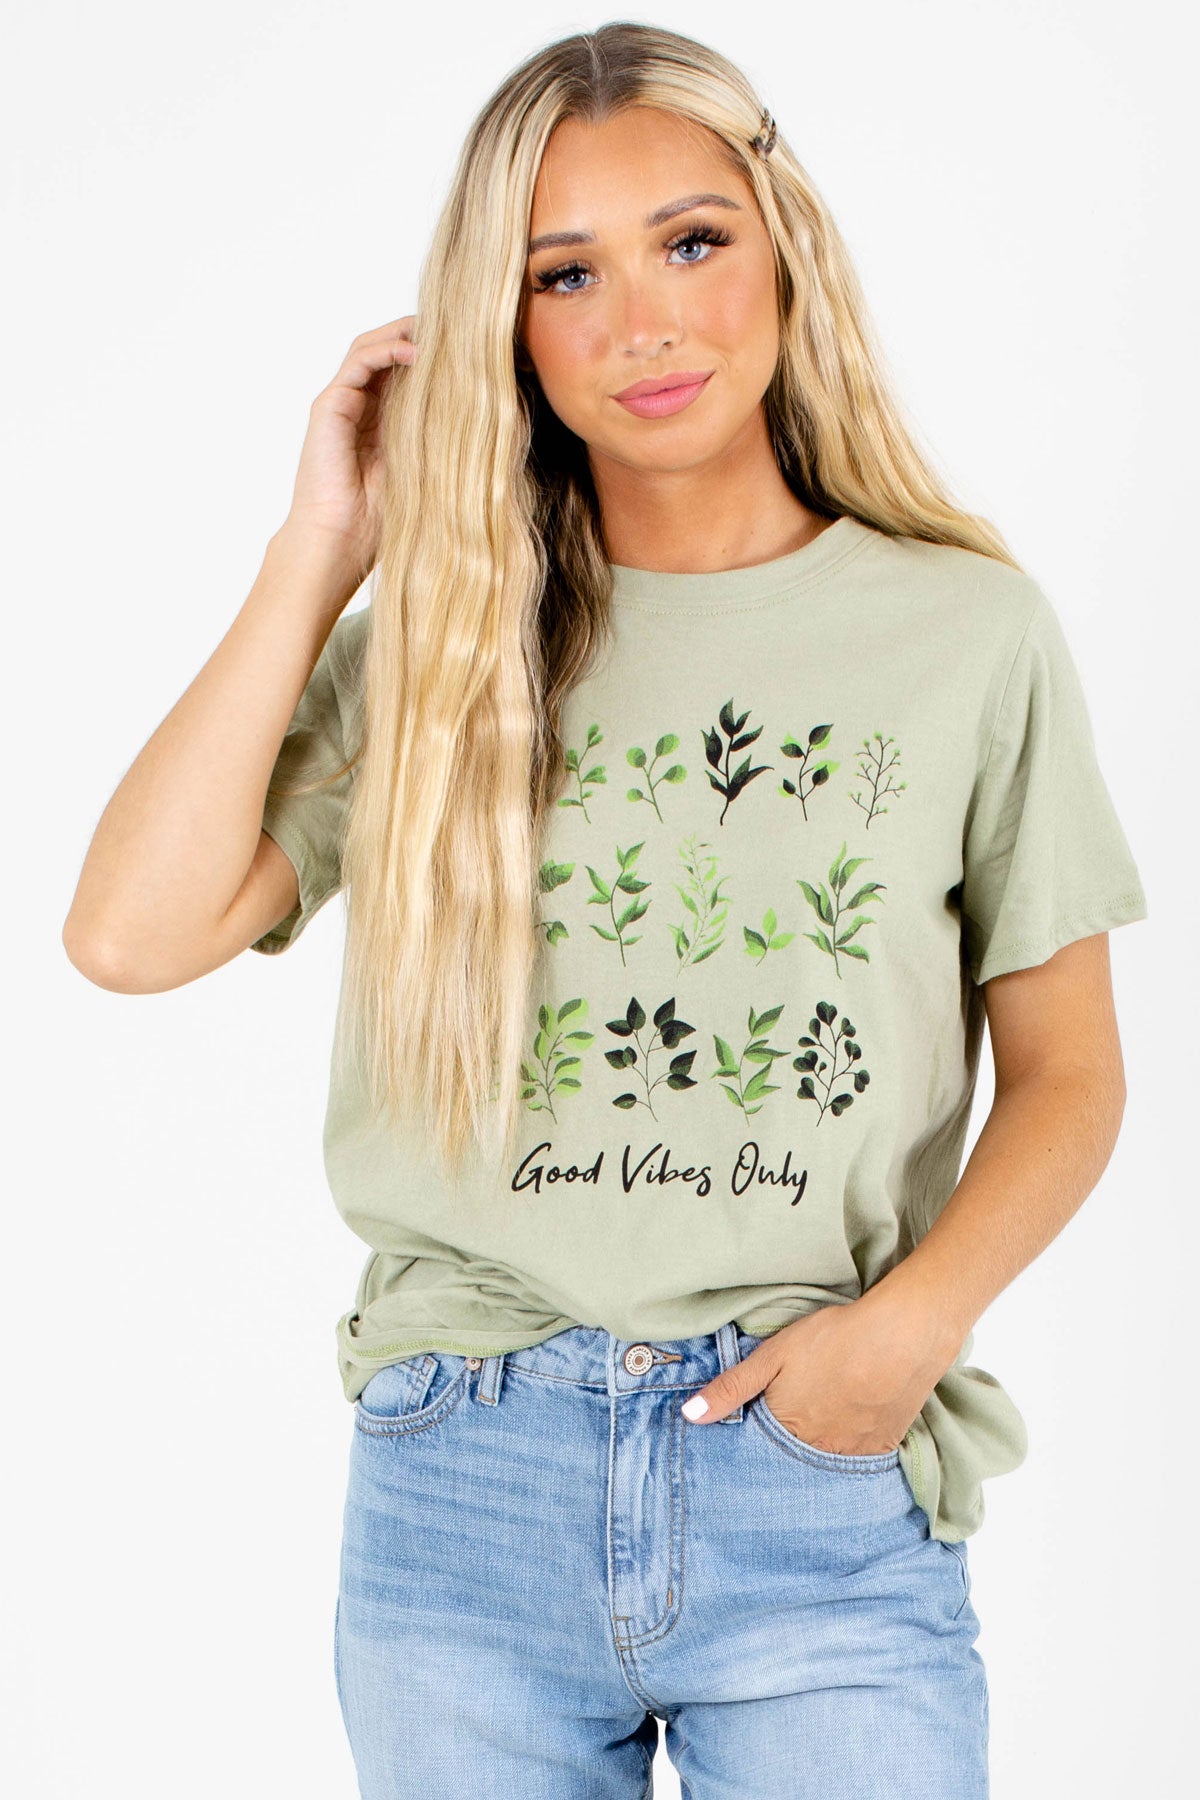 Green "Good Vibes Only" Lettering Boutique Graphic Tees for Women